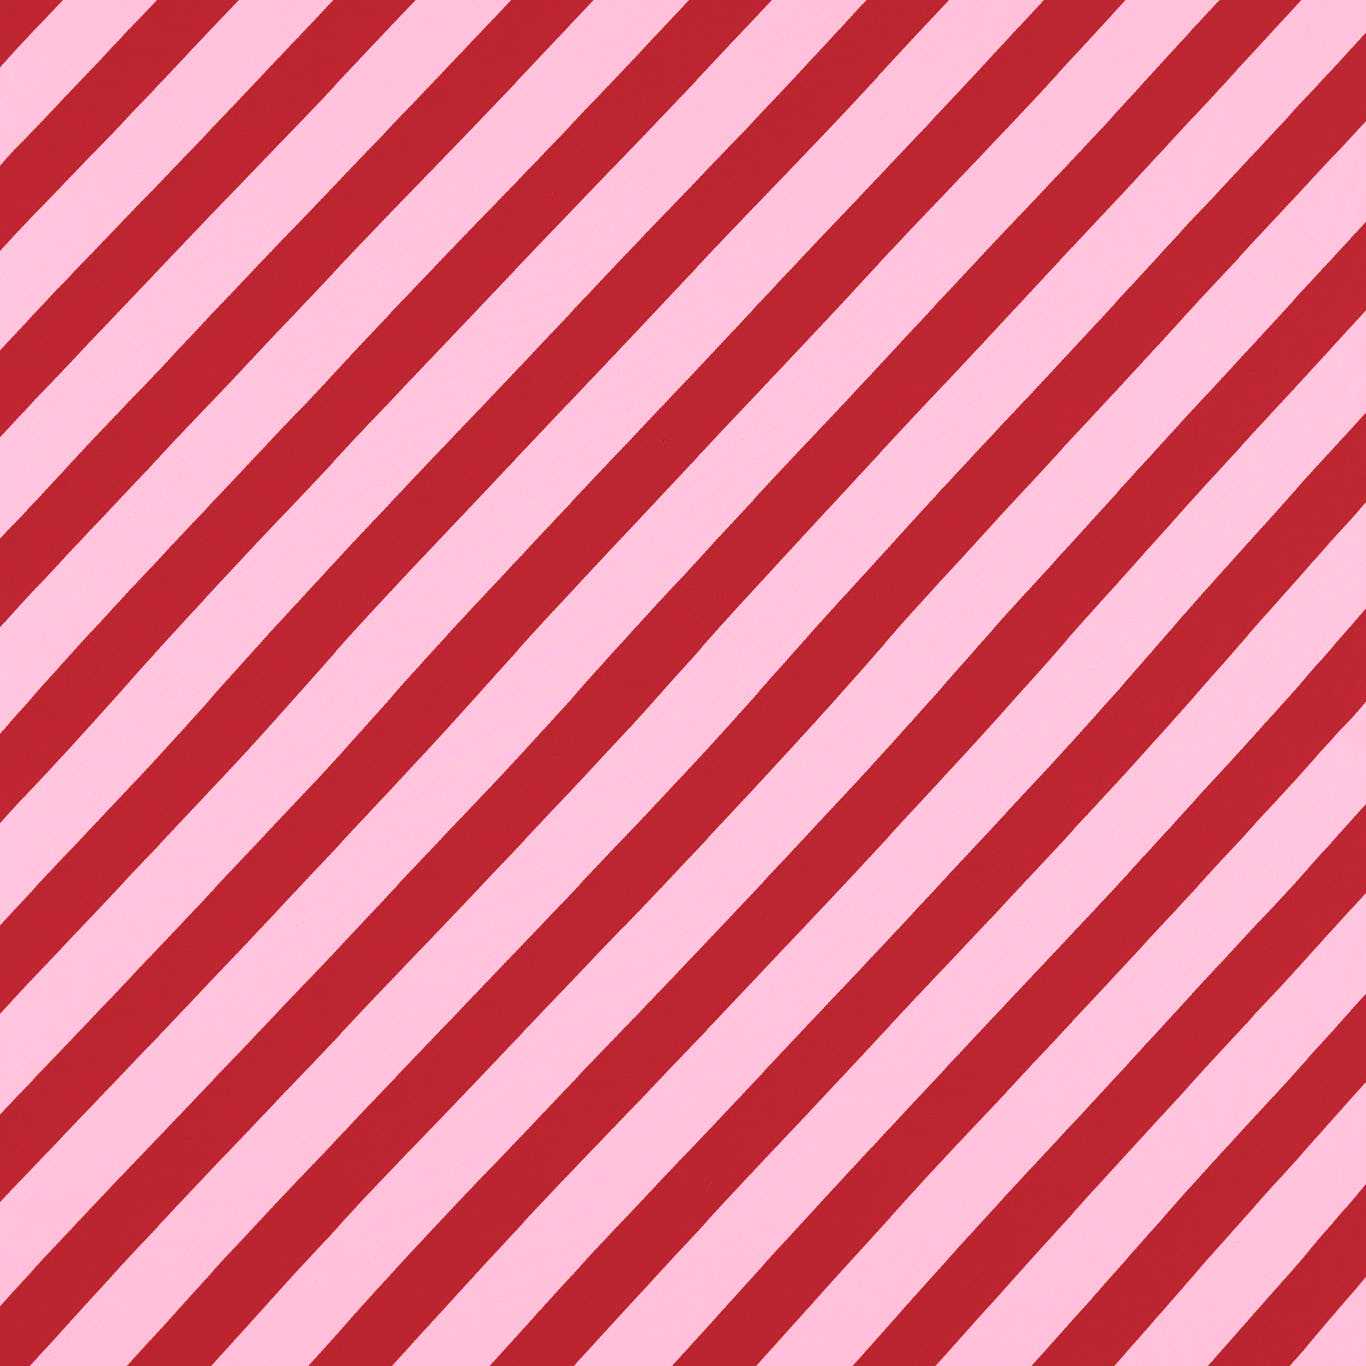 Paper Straw Stripe Ruby/Rose Fabric by HAR